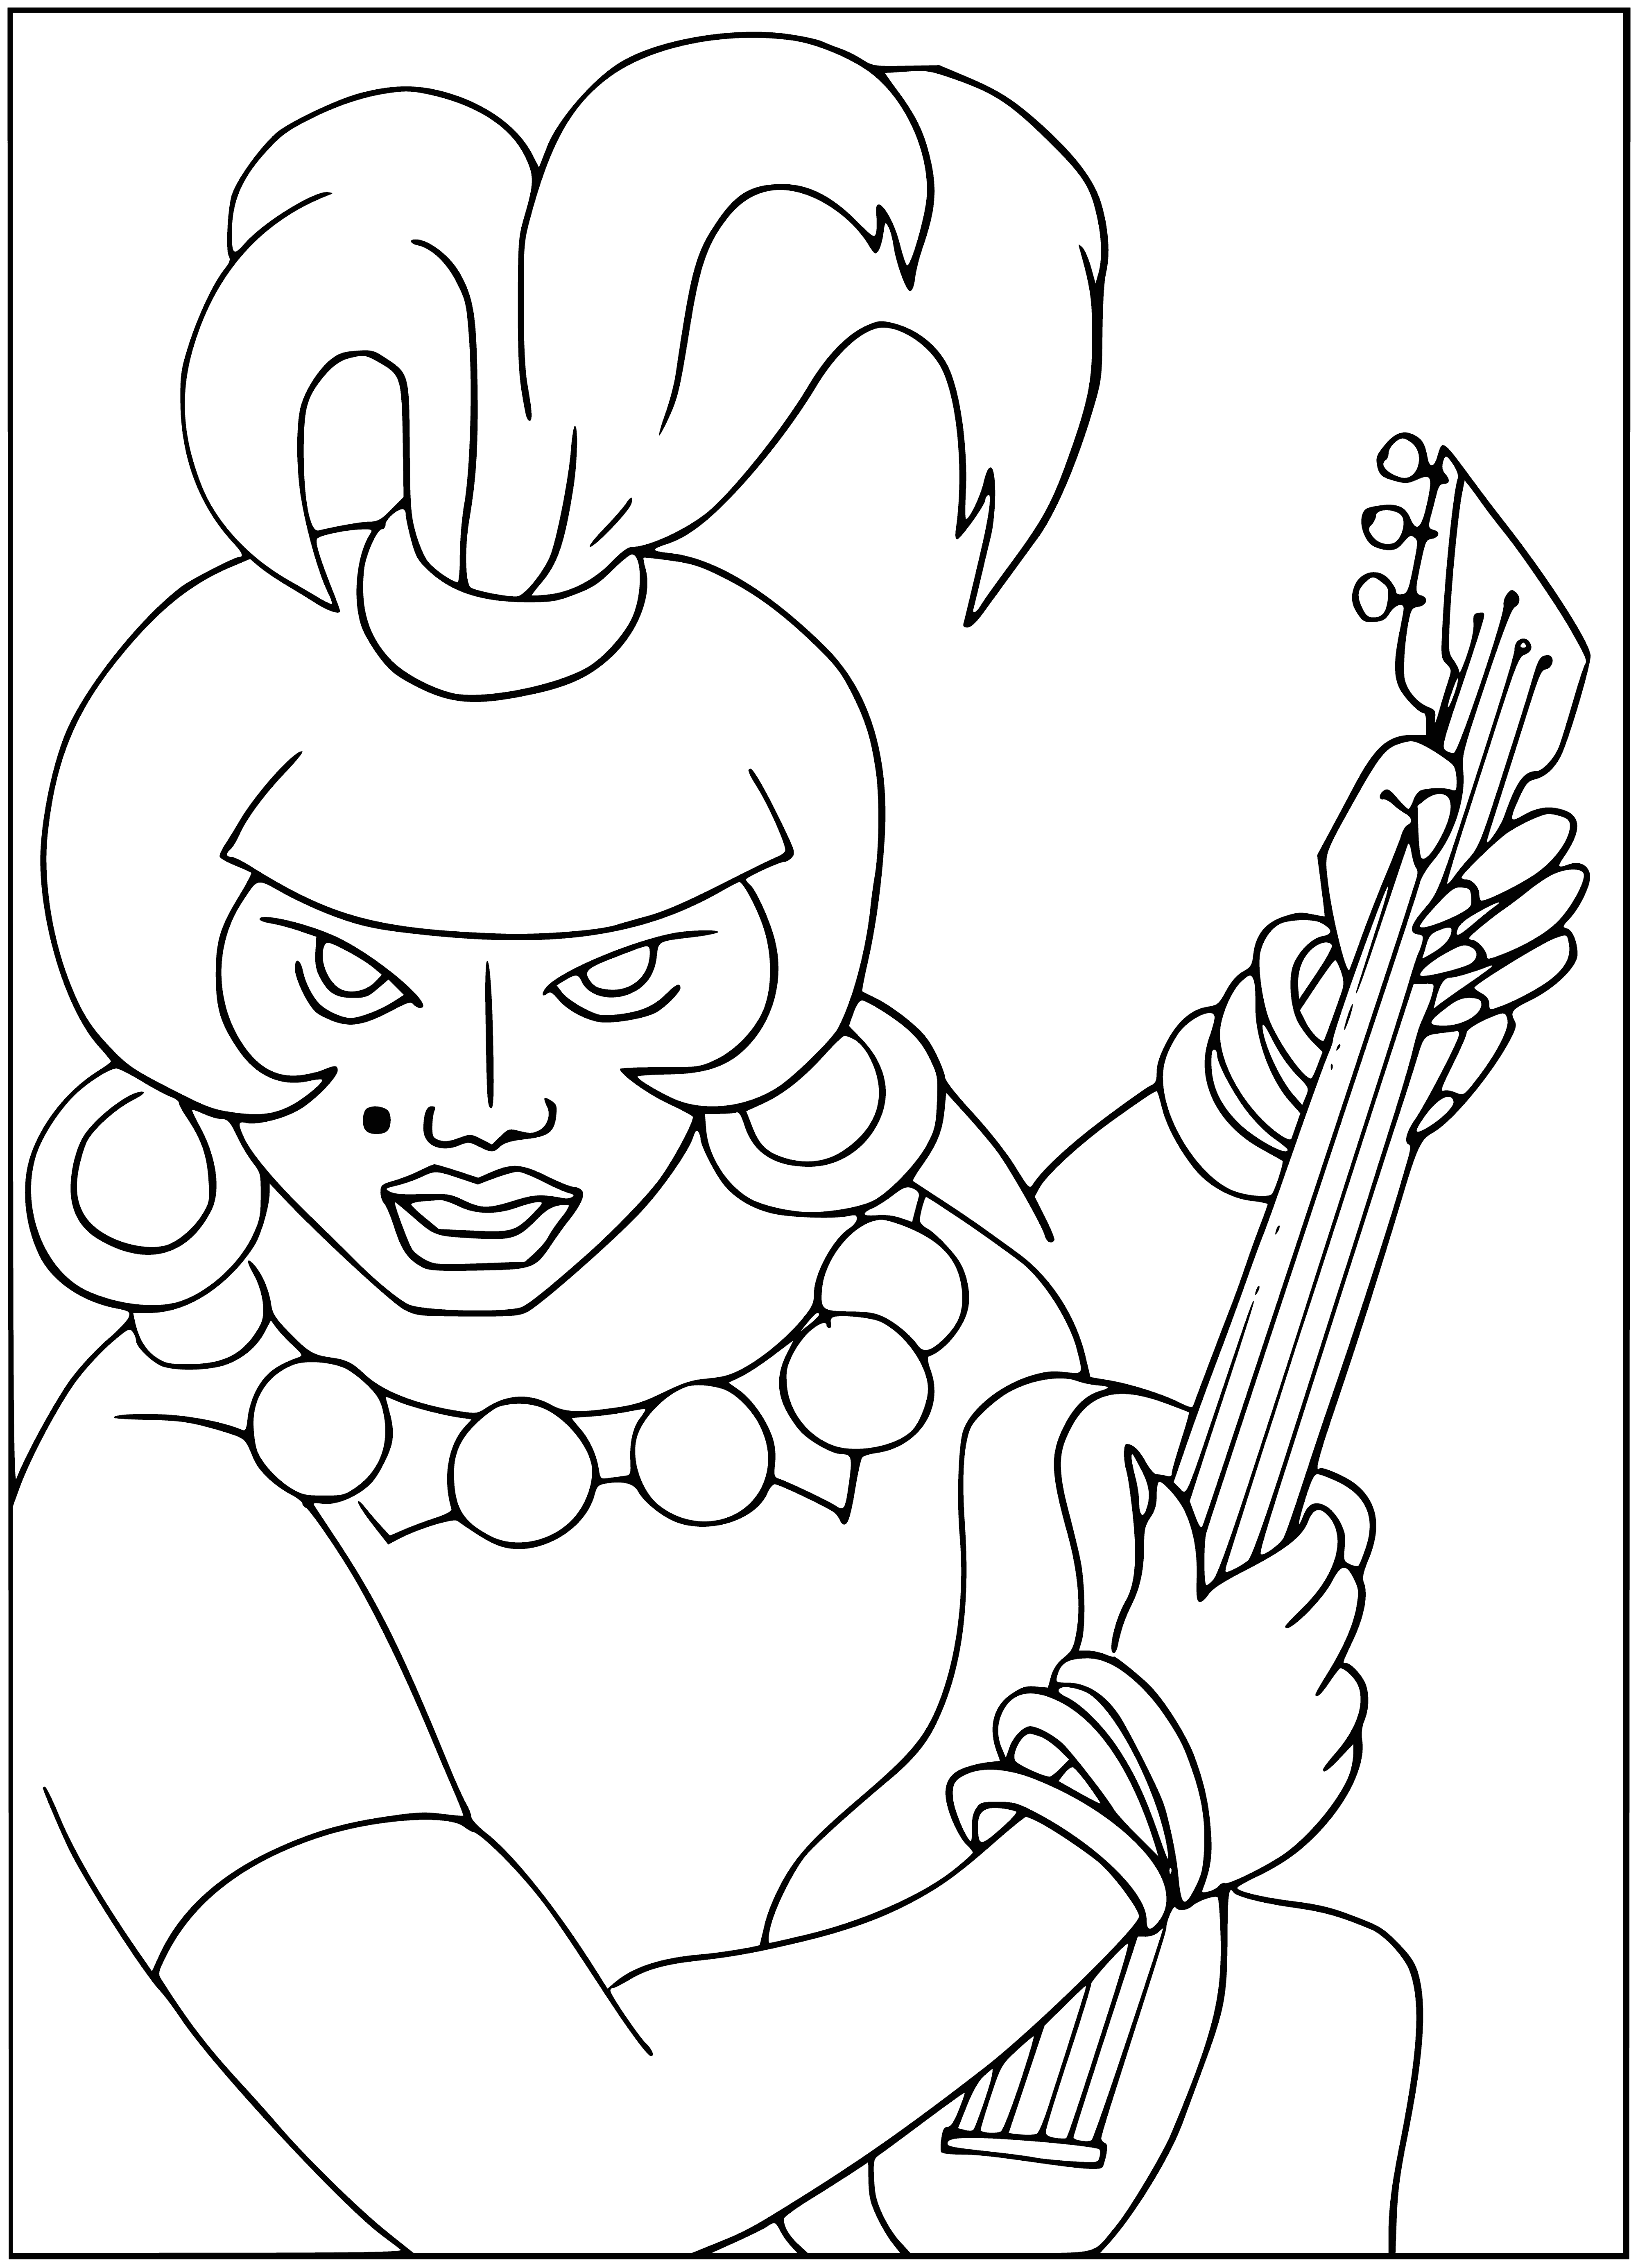 coloring page: Four animals line up playing instruments: donkey with a satchel, dog with a fiddle, cat with bagpipes and rooster with cymbals. Behind them a brick house smokes.